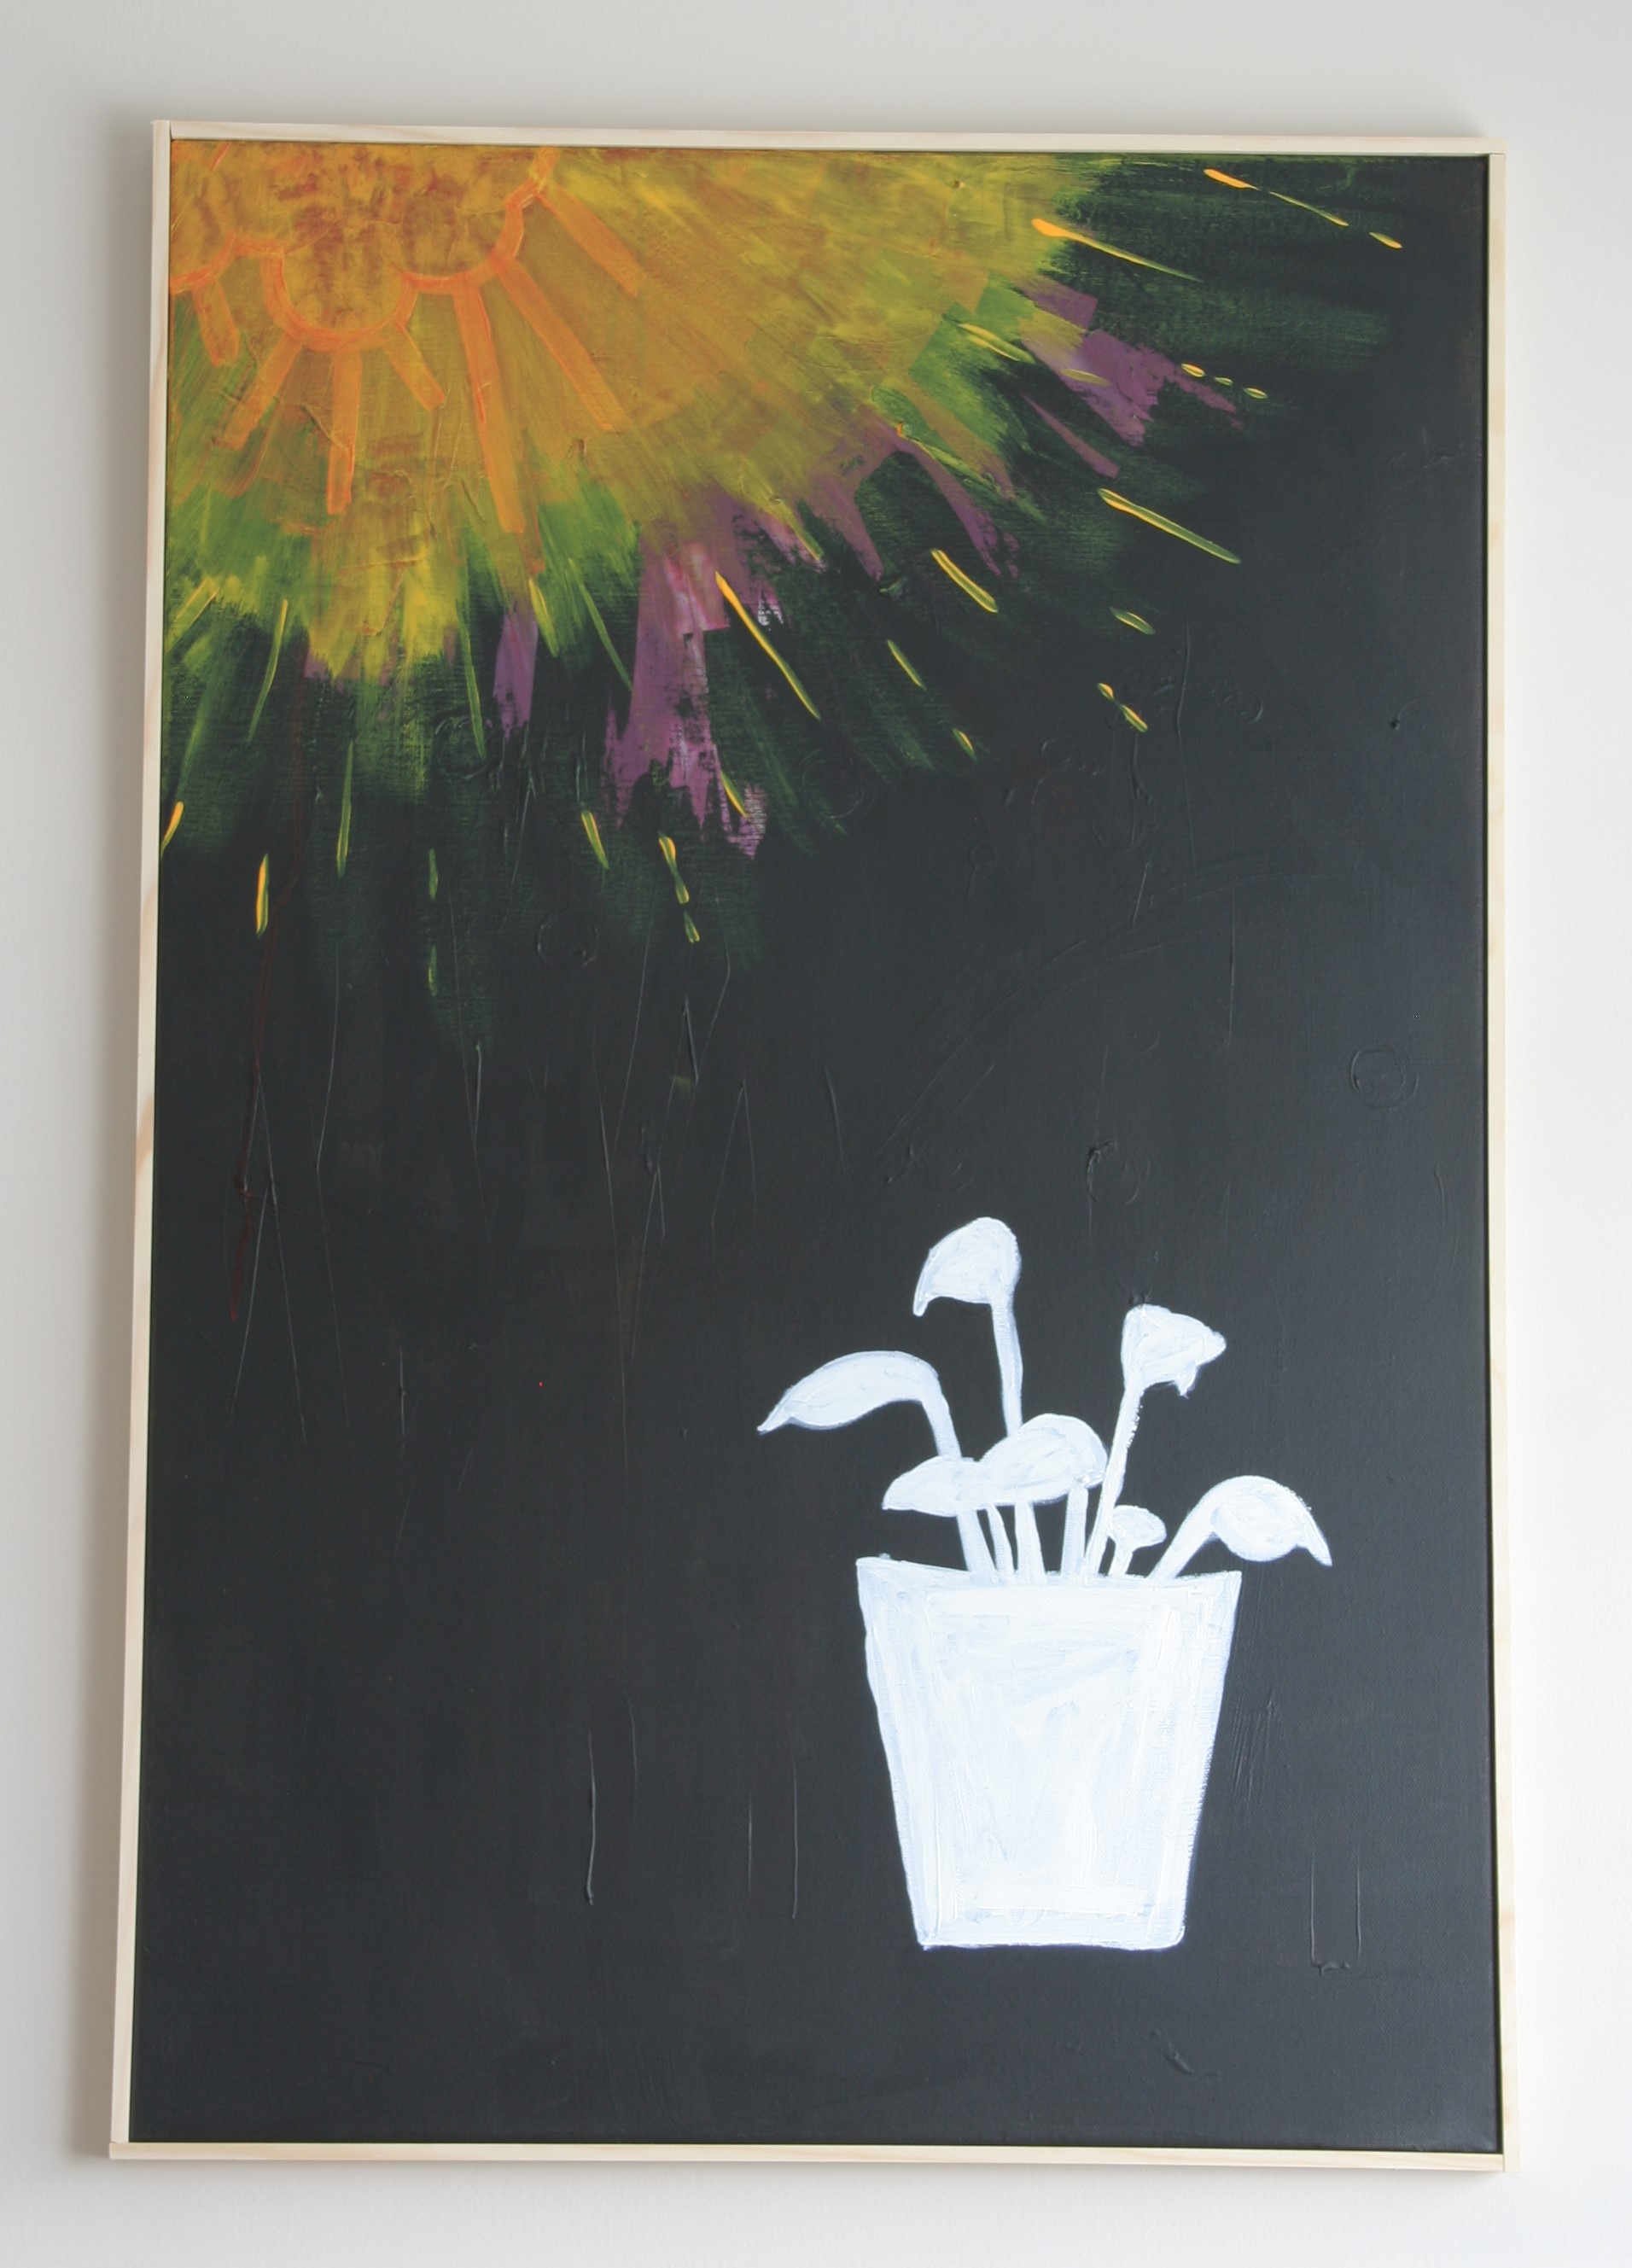 2024 - Acrylic and paper on canvas with a simple wooden frame. White-filled outline of plant pot and leaves on a black background, with top left a yellow and orange sun over purple burst.